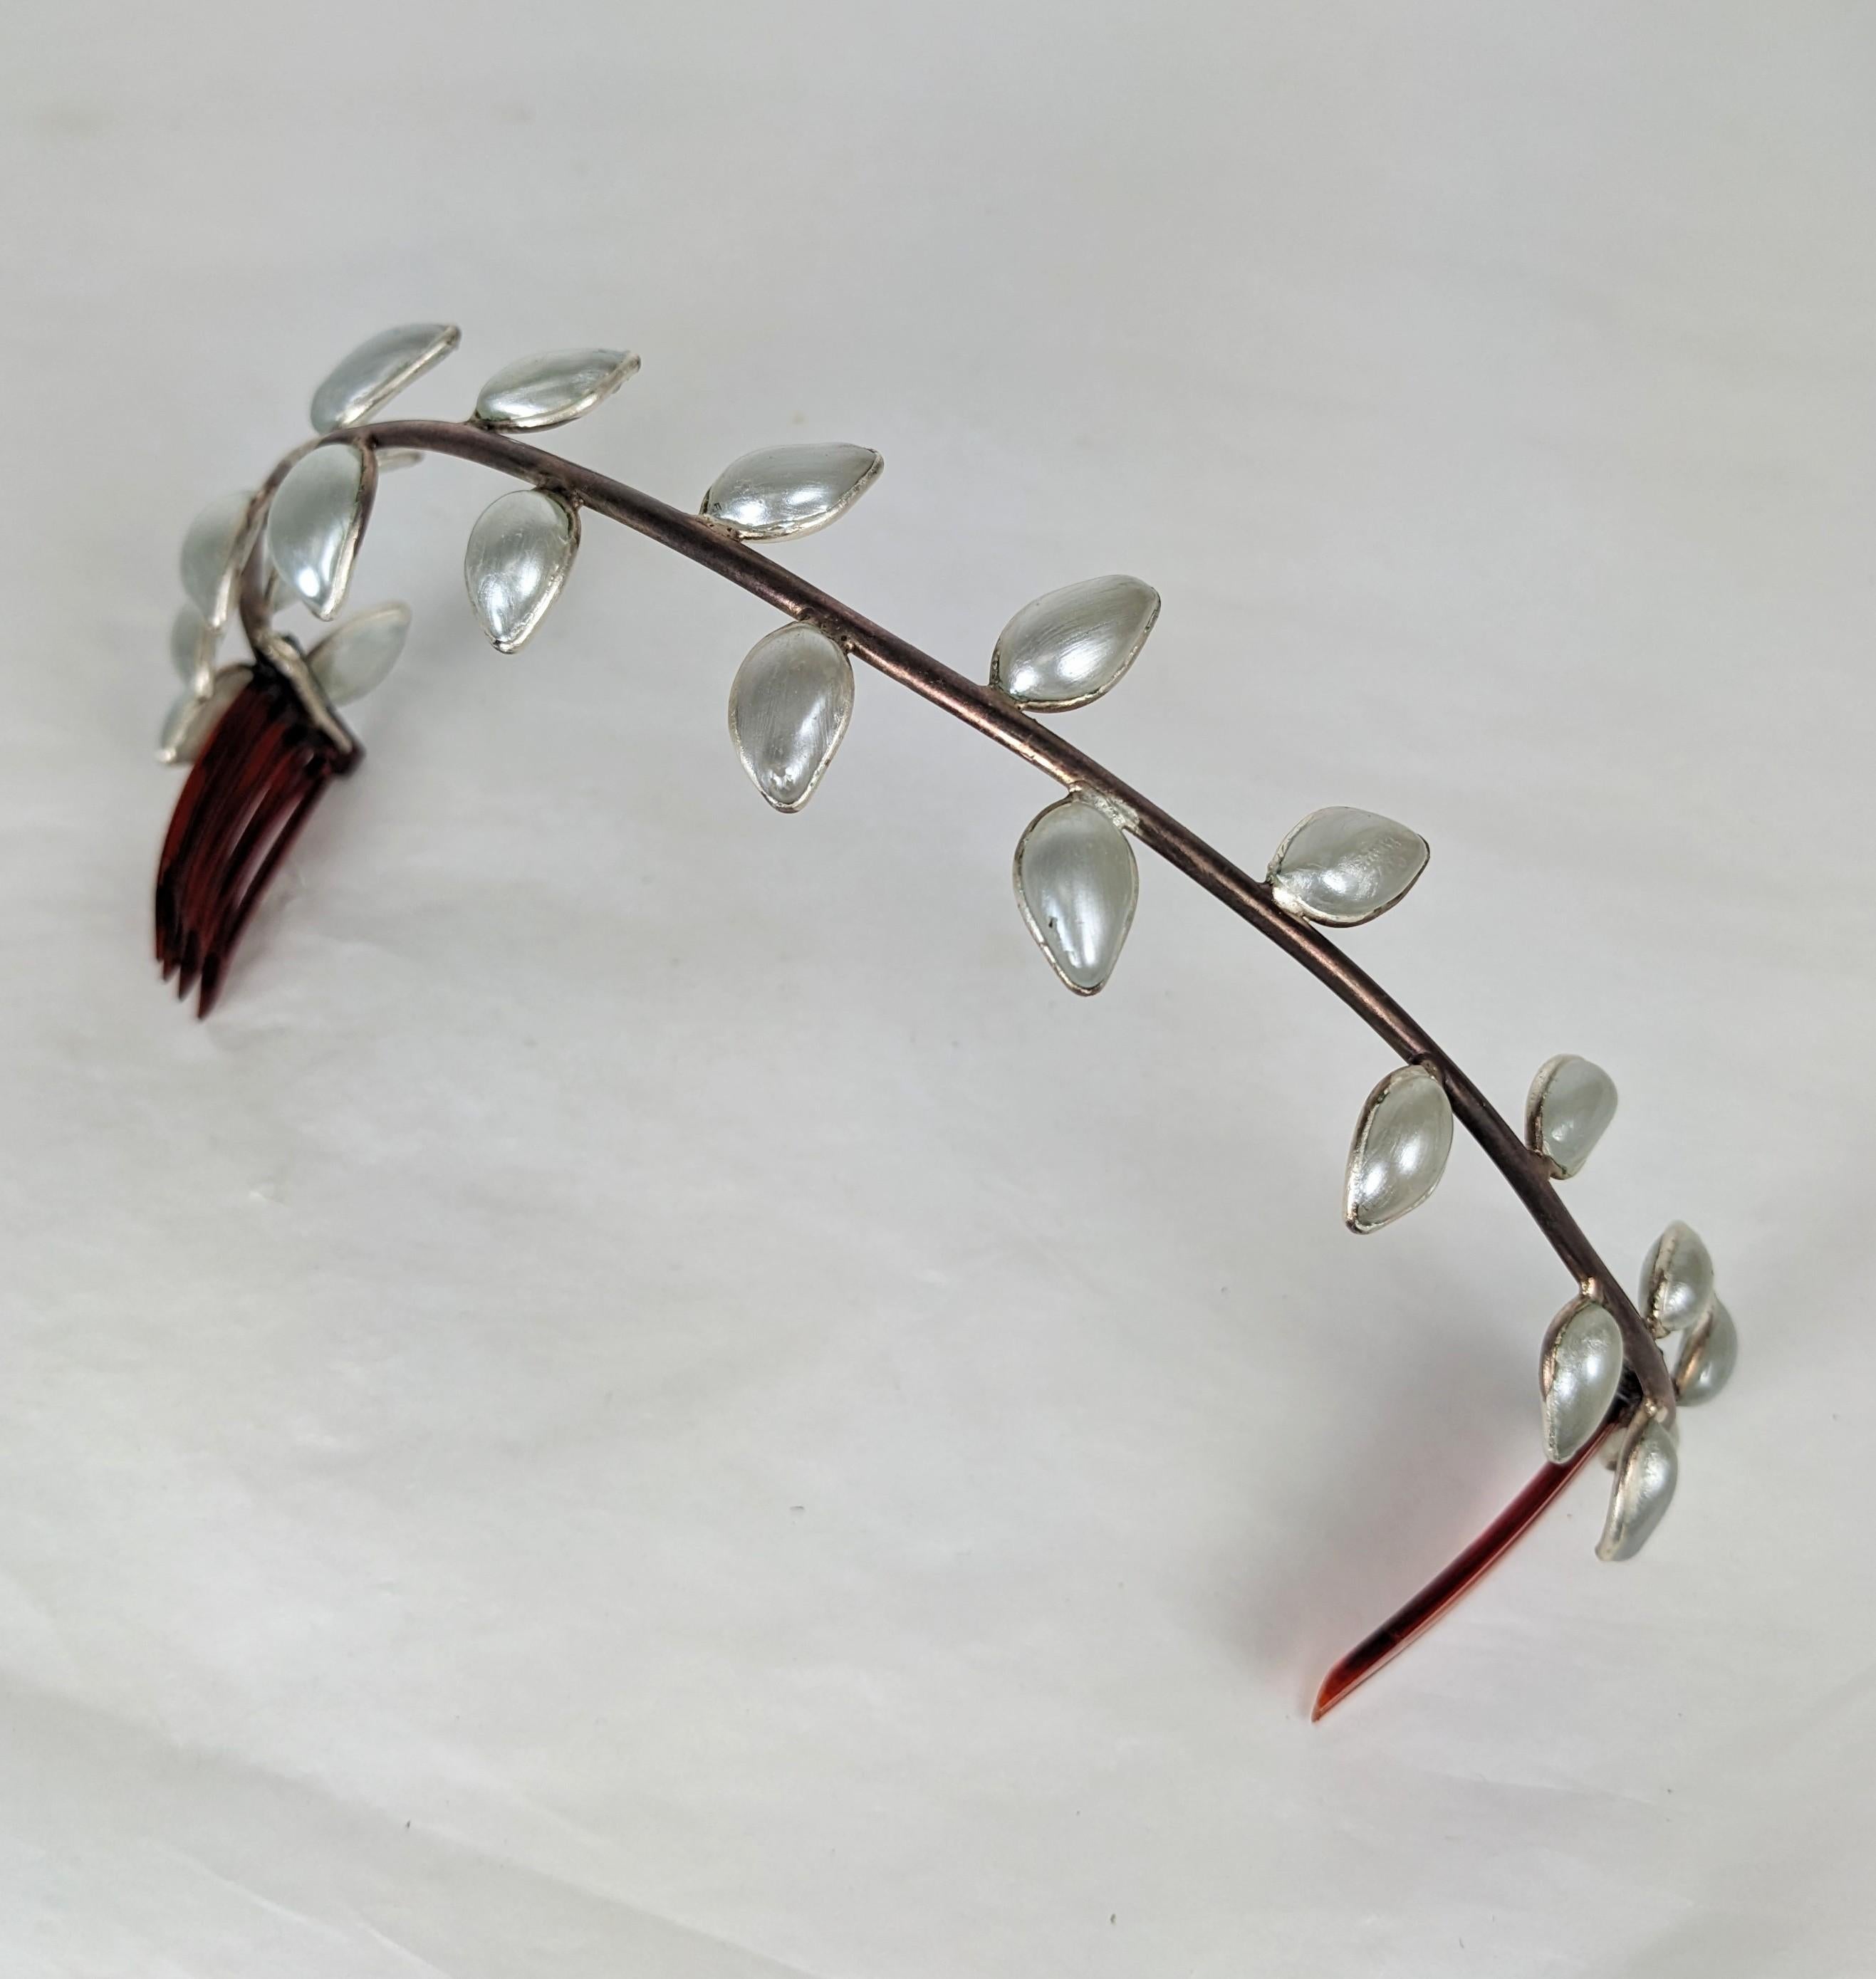 Early Rare Maison Gripoix Poured Glass Pearl Nacre Leaf Head Band from the 1930's from the Gripoix Archive. Hand made silvered bronze with pate de verre petals in mother of pearl lacquer. Perfect wedding accessory. 10.5